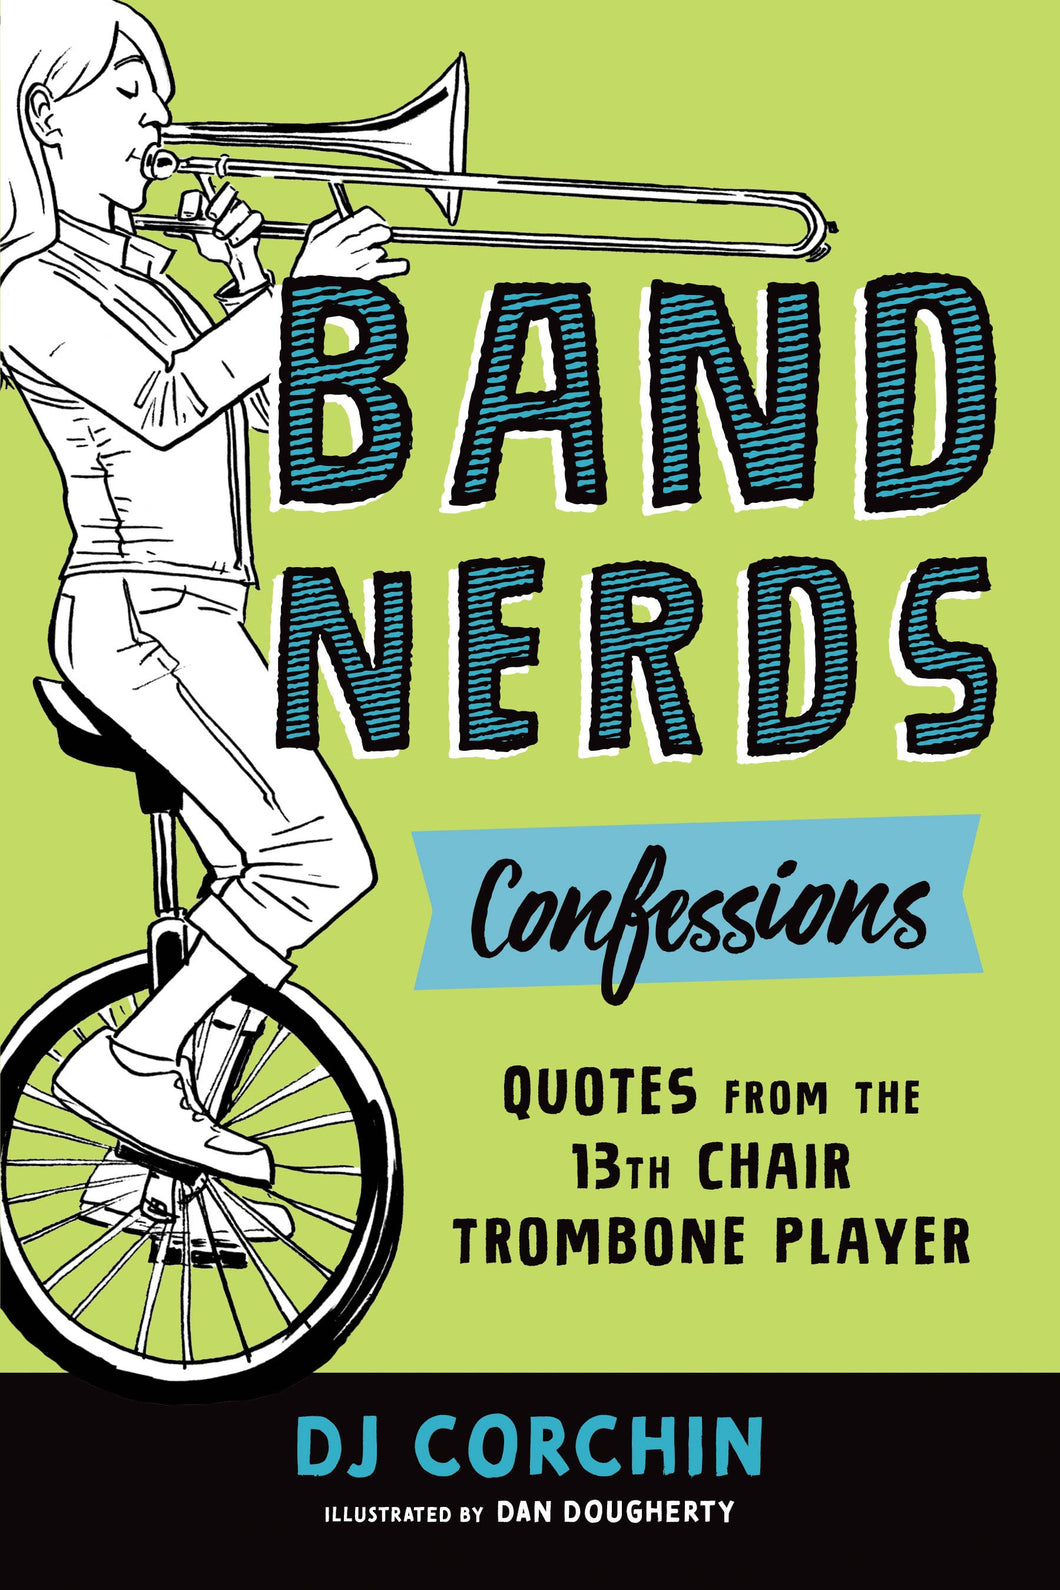 Band Nerds Confessions (Band Nerds Series)